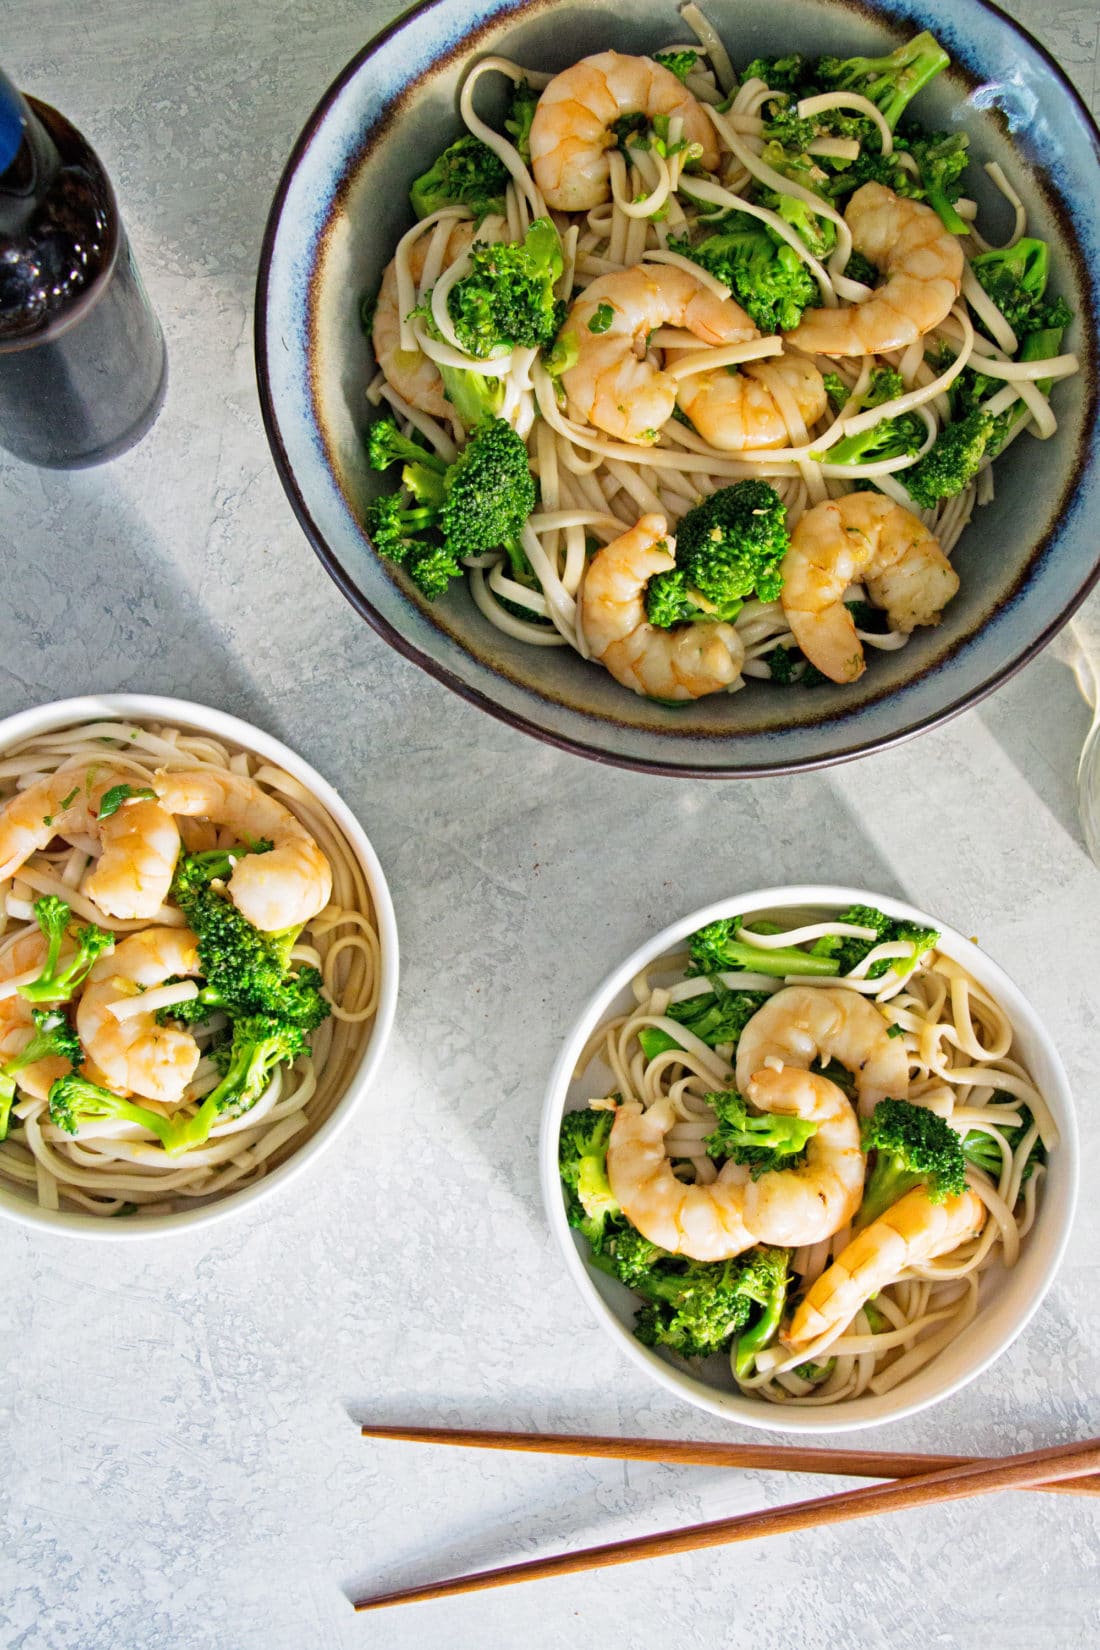 Three bowls of Shrimp and Broccoli Stir Fry with Udon Noodles.